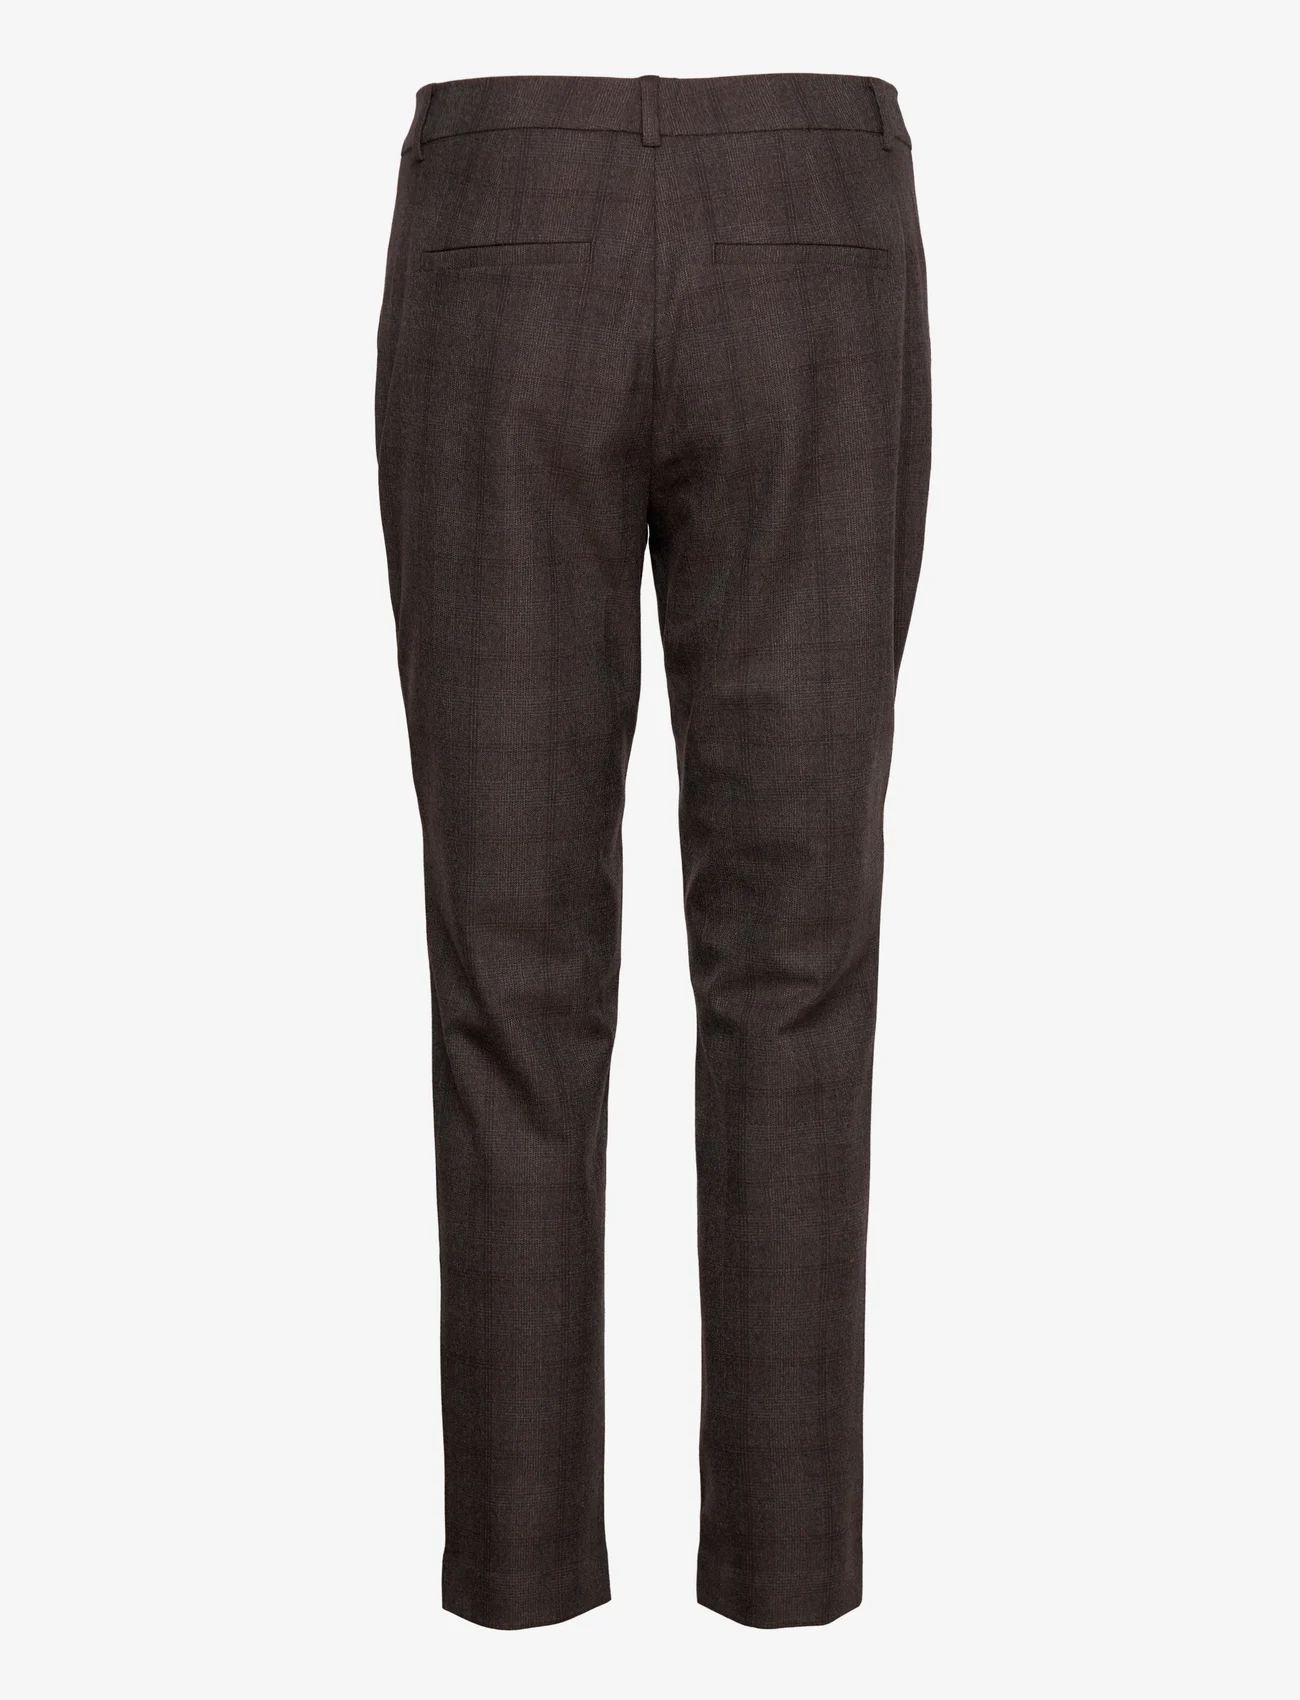 FIVEUNITS - Kylie Crop - tailored trousers - brown check - 1